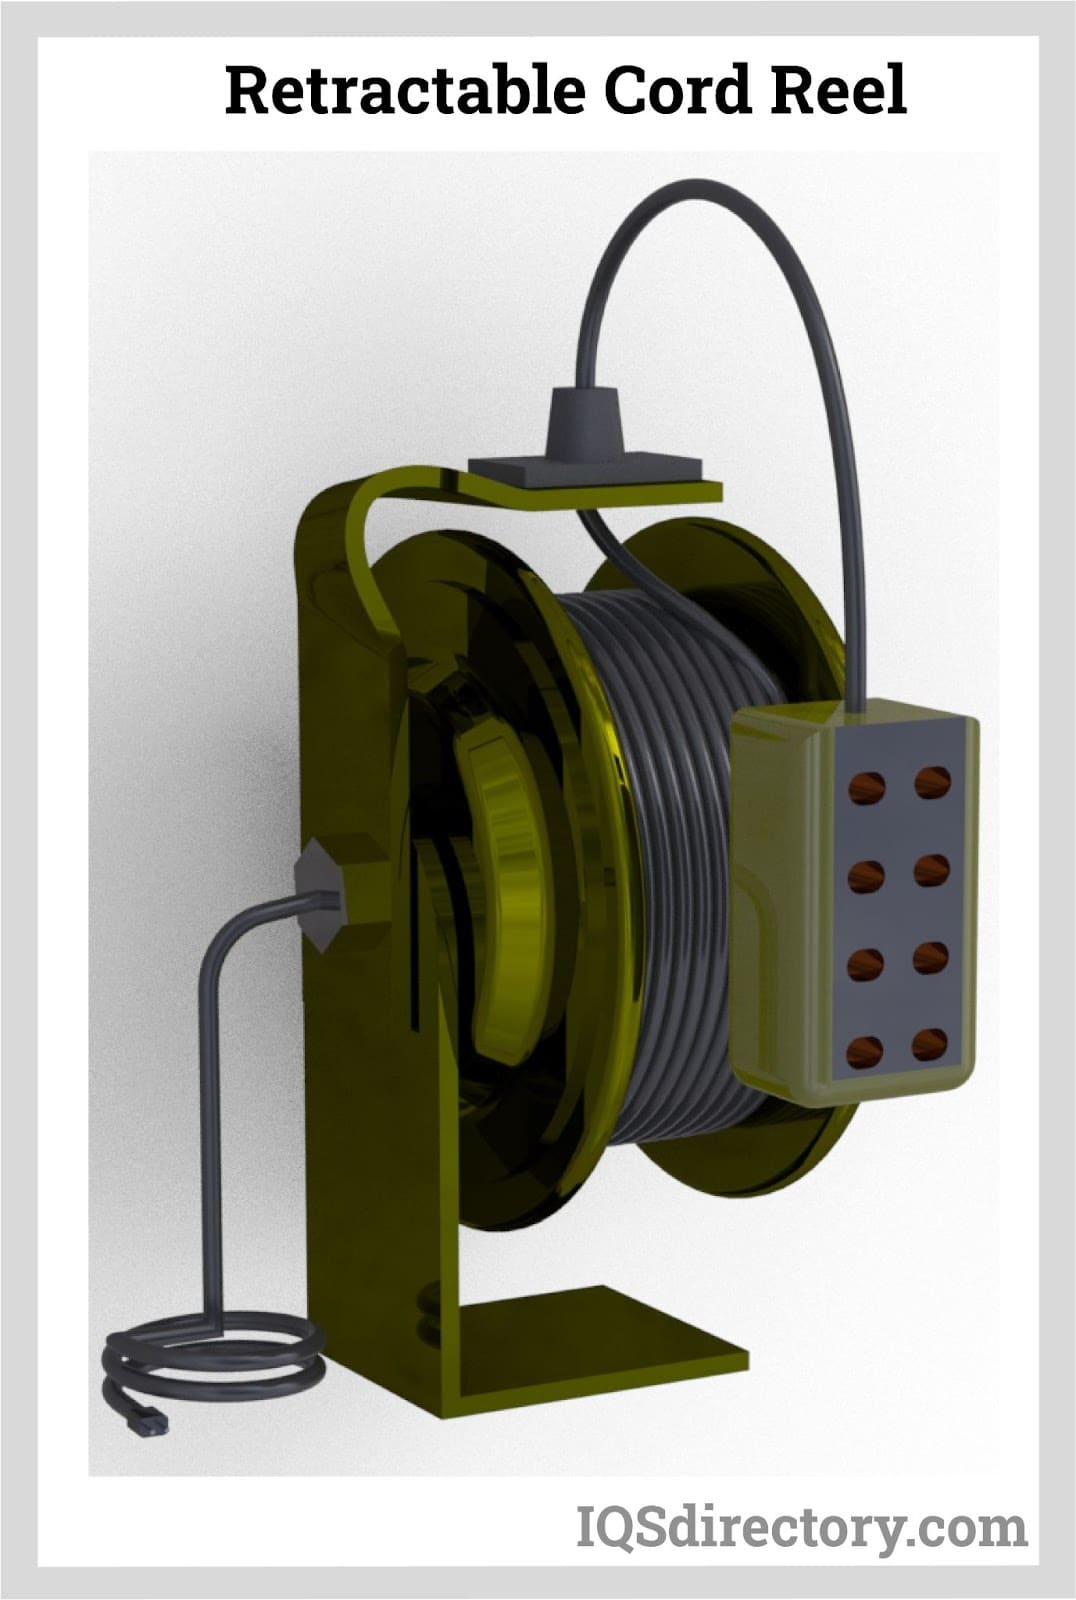 Cable Reel Manufacturers